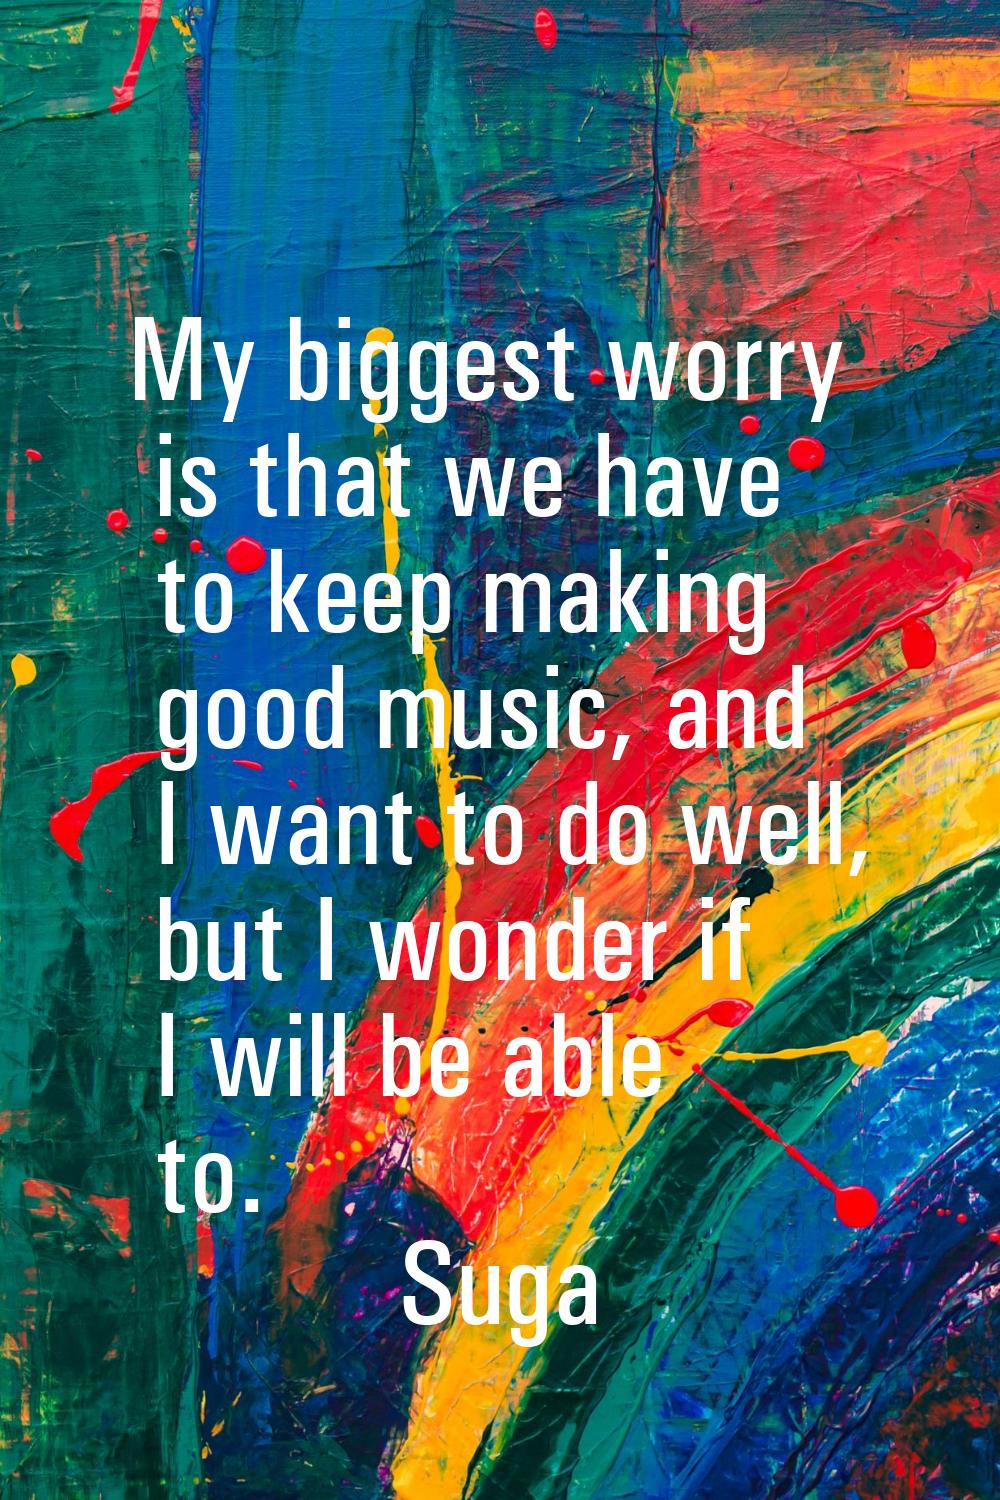 My biggest worry is that we have to keep making good music, and I want to do well, but I wonder if 